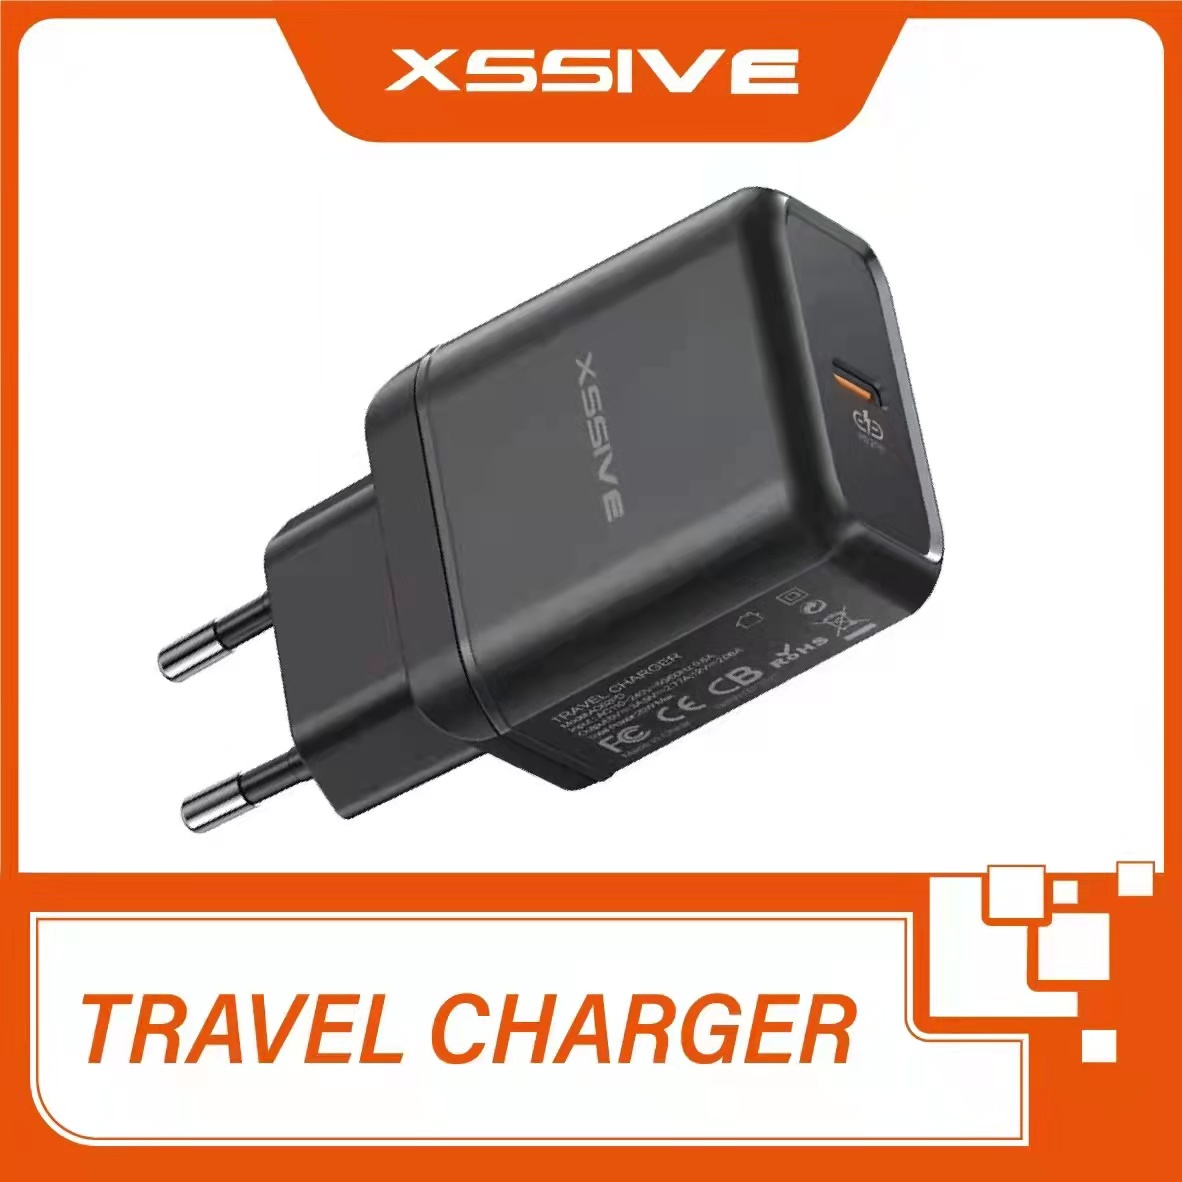 Xssive - Travel Charger